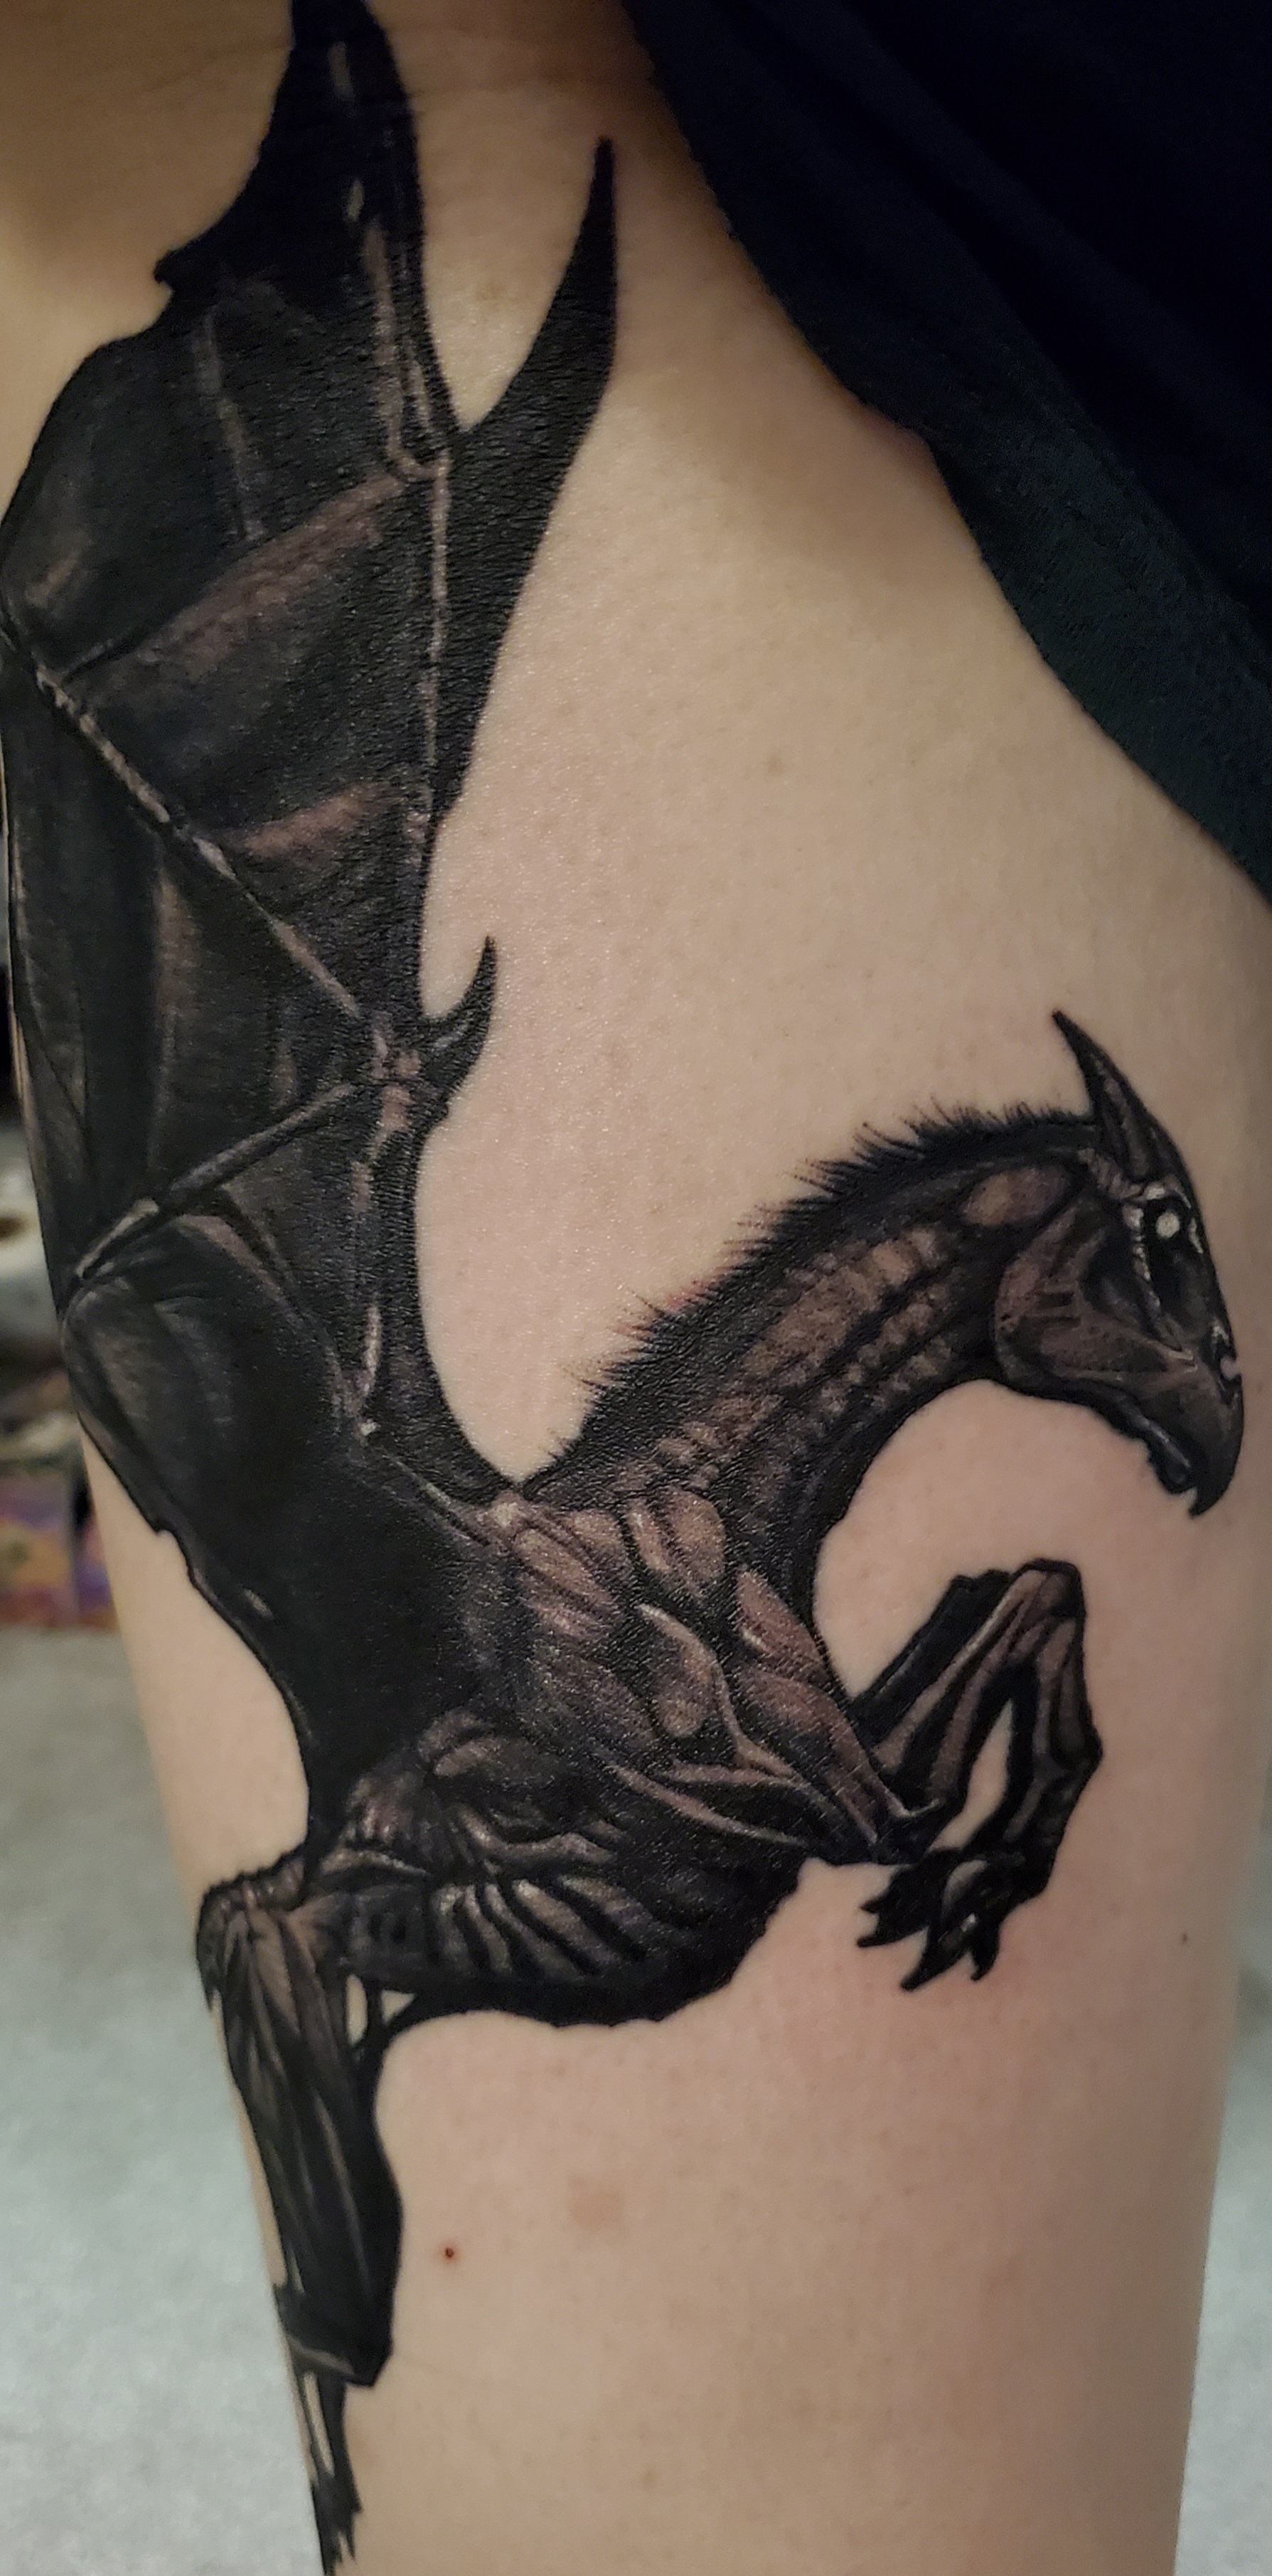 Thestral from my Harry Potter Predrawns for @courtneyshewchuk ! I can't  wait to add more cool stuff to this arm 🖤 Lines and some sha... | Instagram